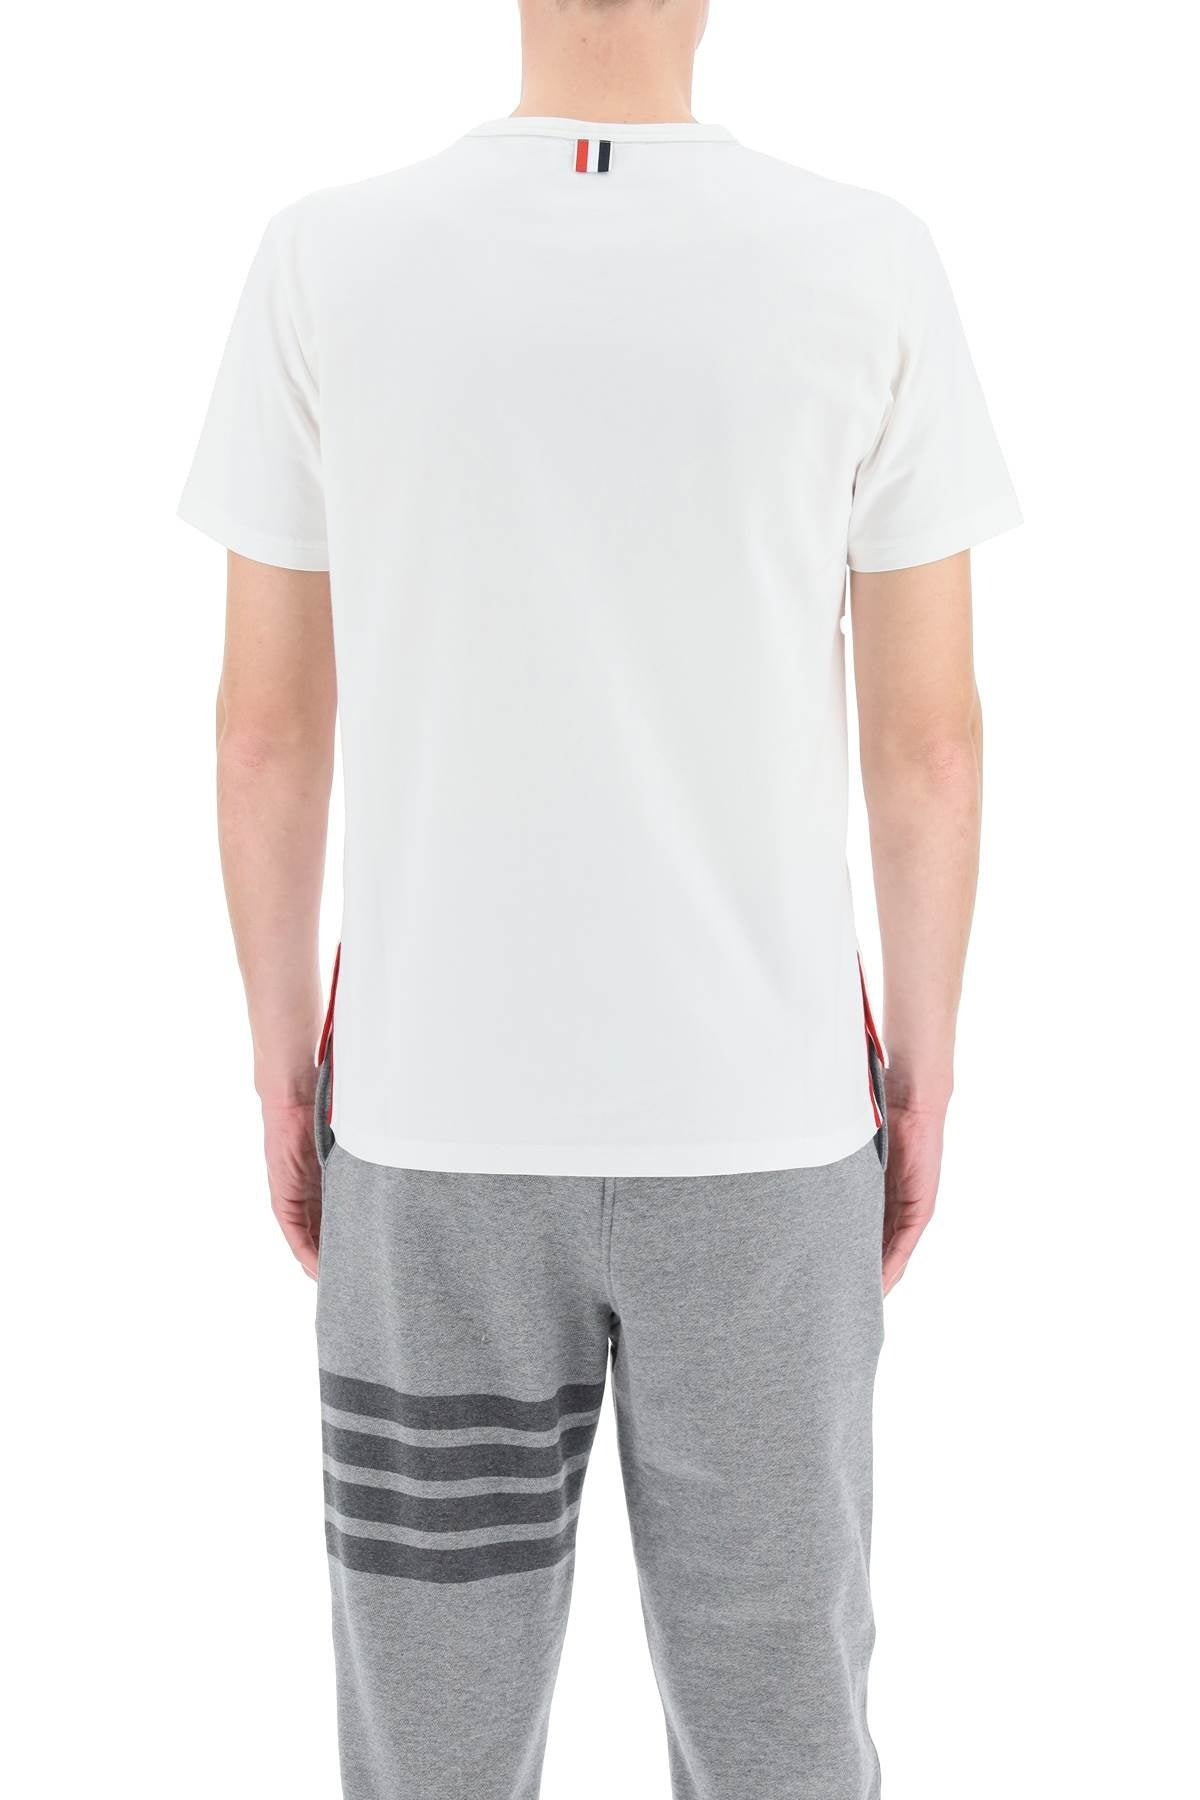 Thom Browne T-Shirt With Tricolor Pocket Men - 3